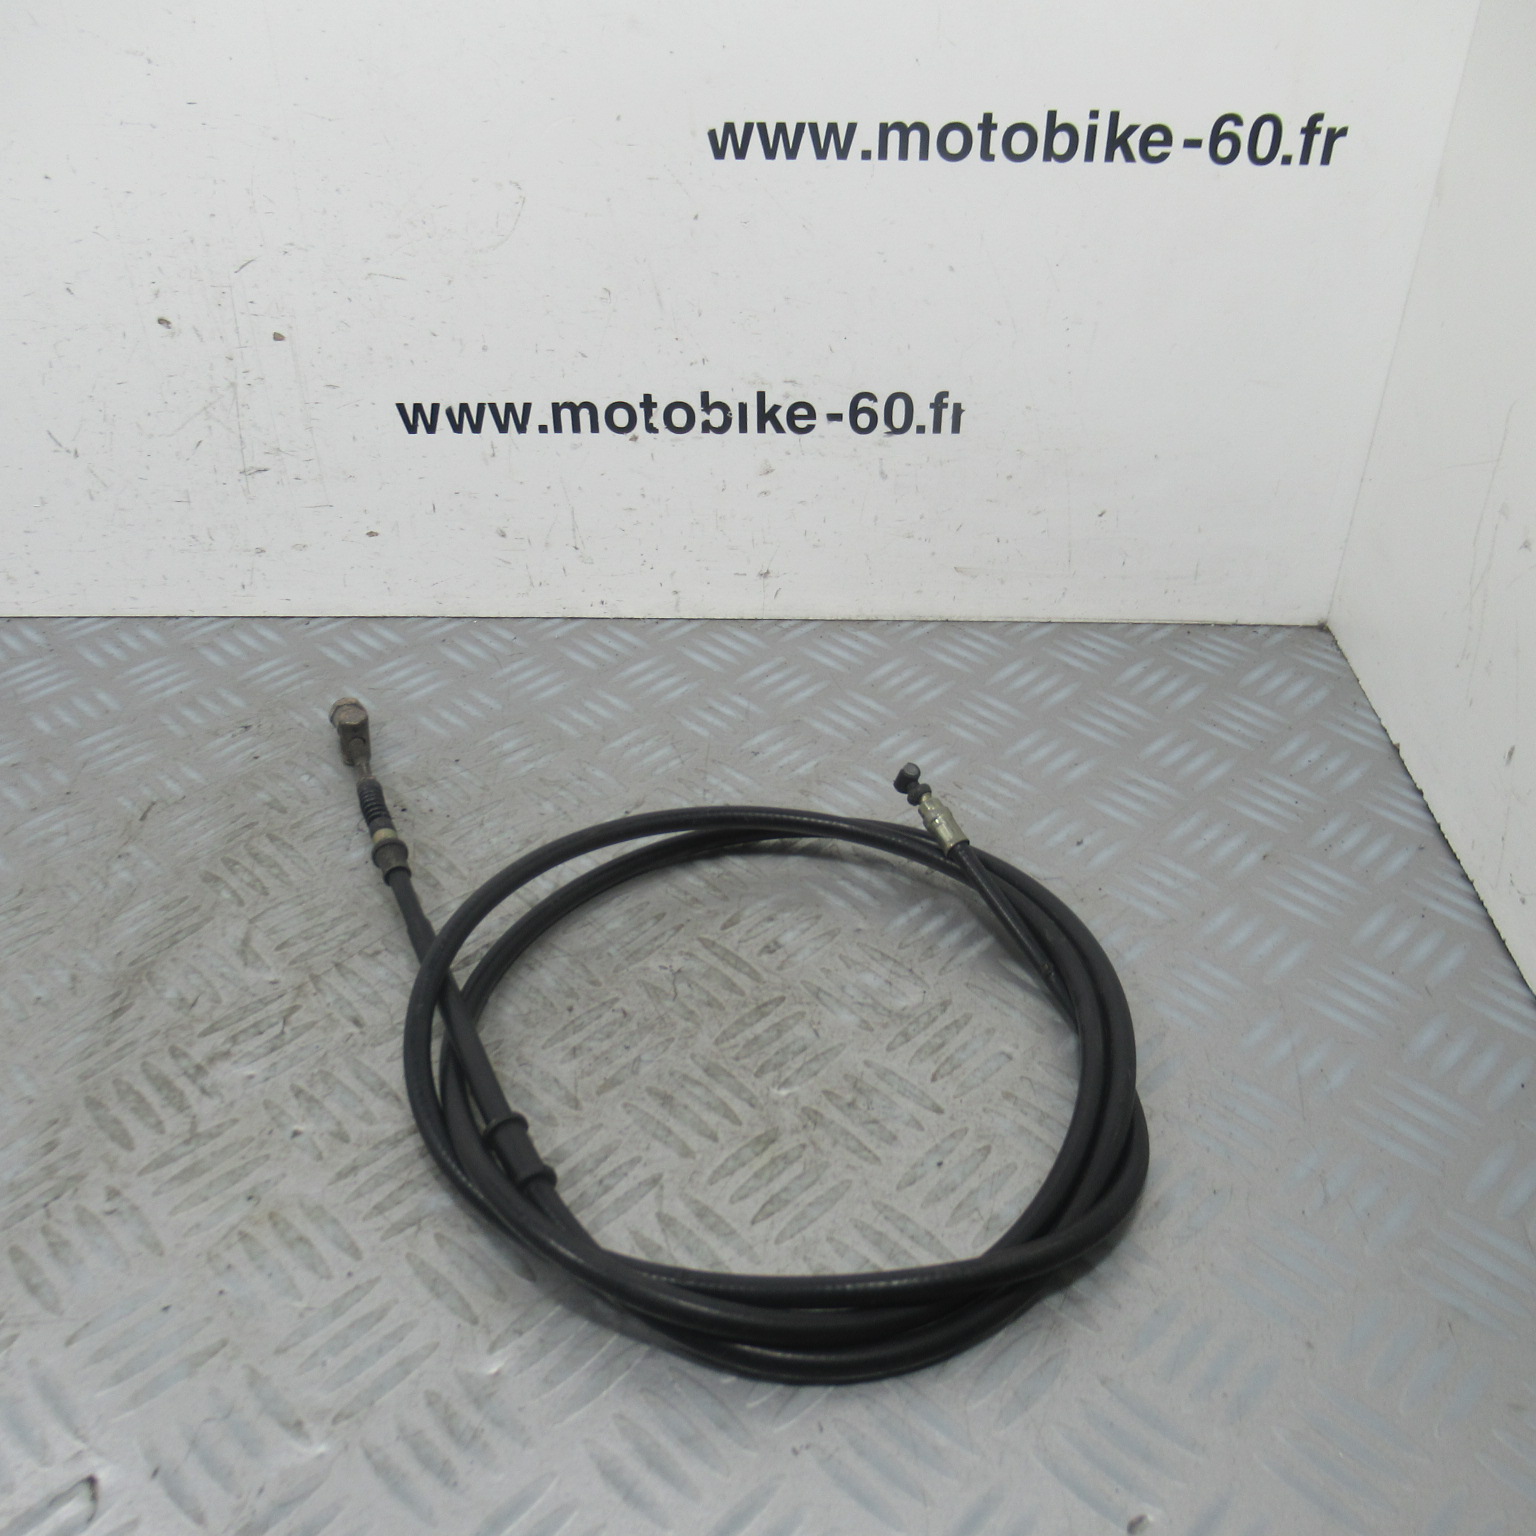 Cable frein arriere Kymco Agility 50 4t